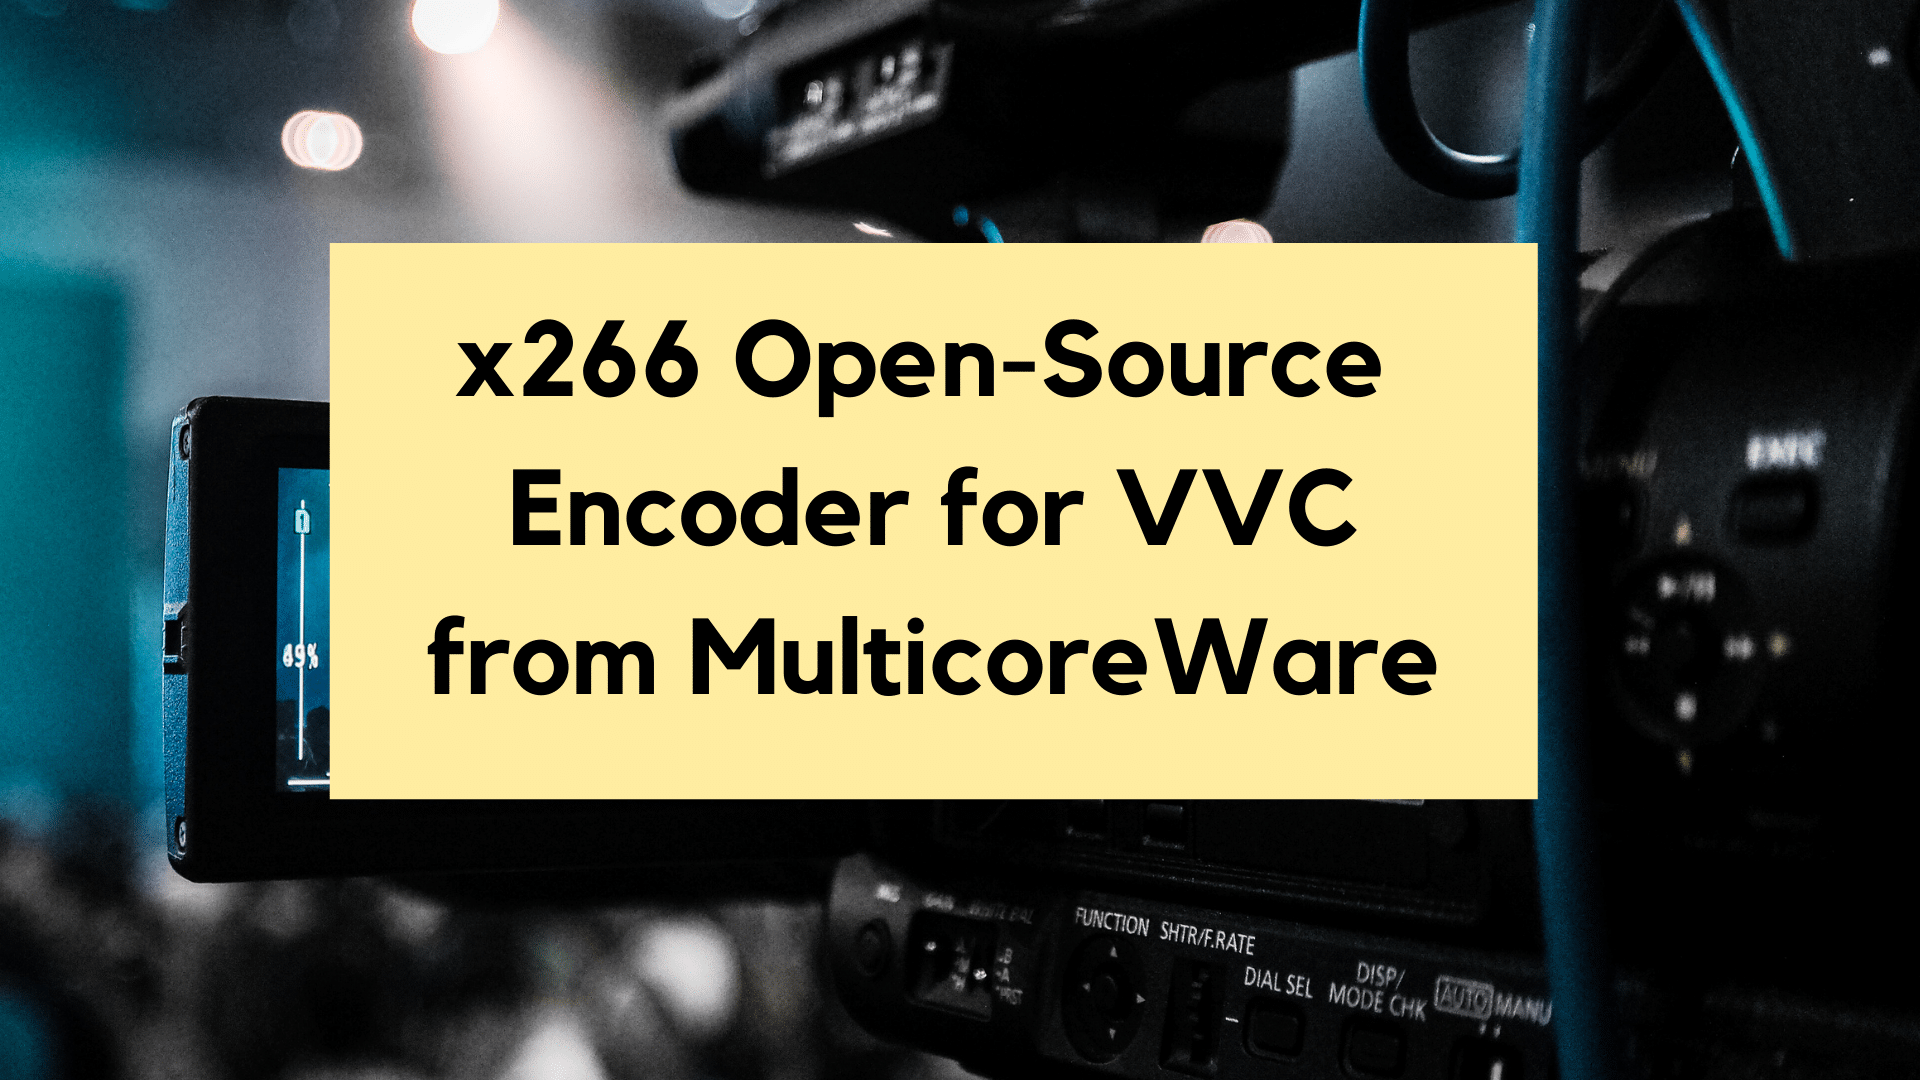 x266 Open-Source Encoder for VVC by MulticoreWare